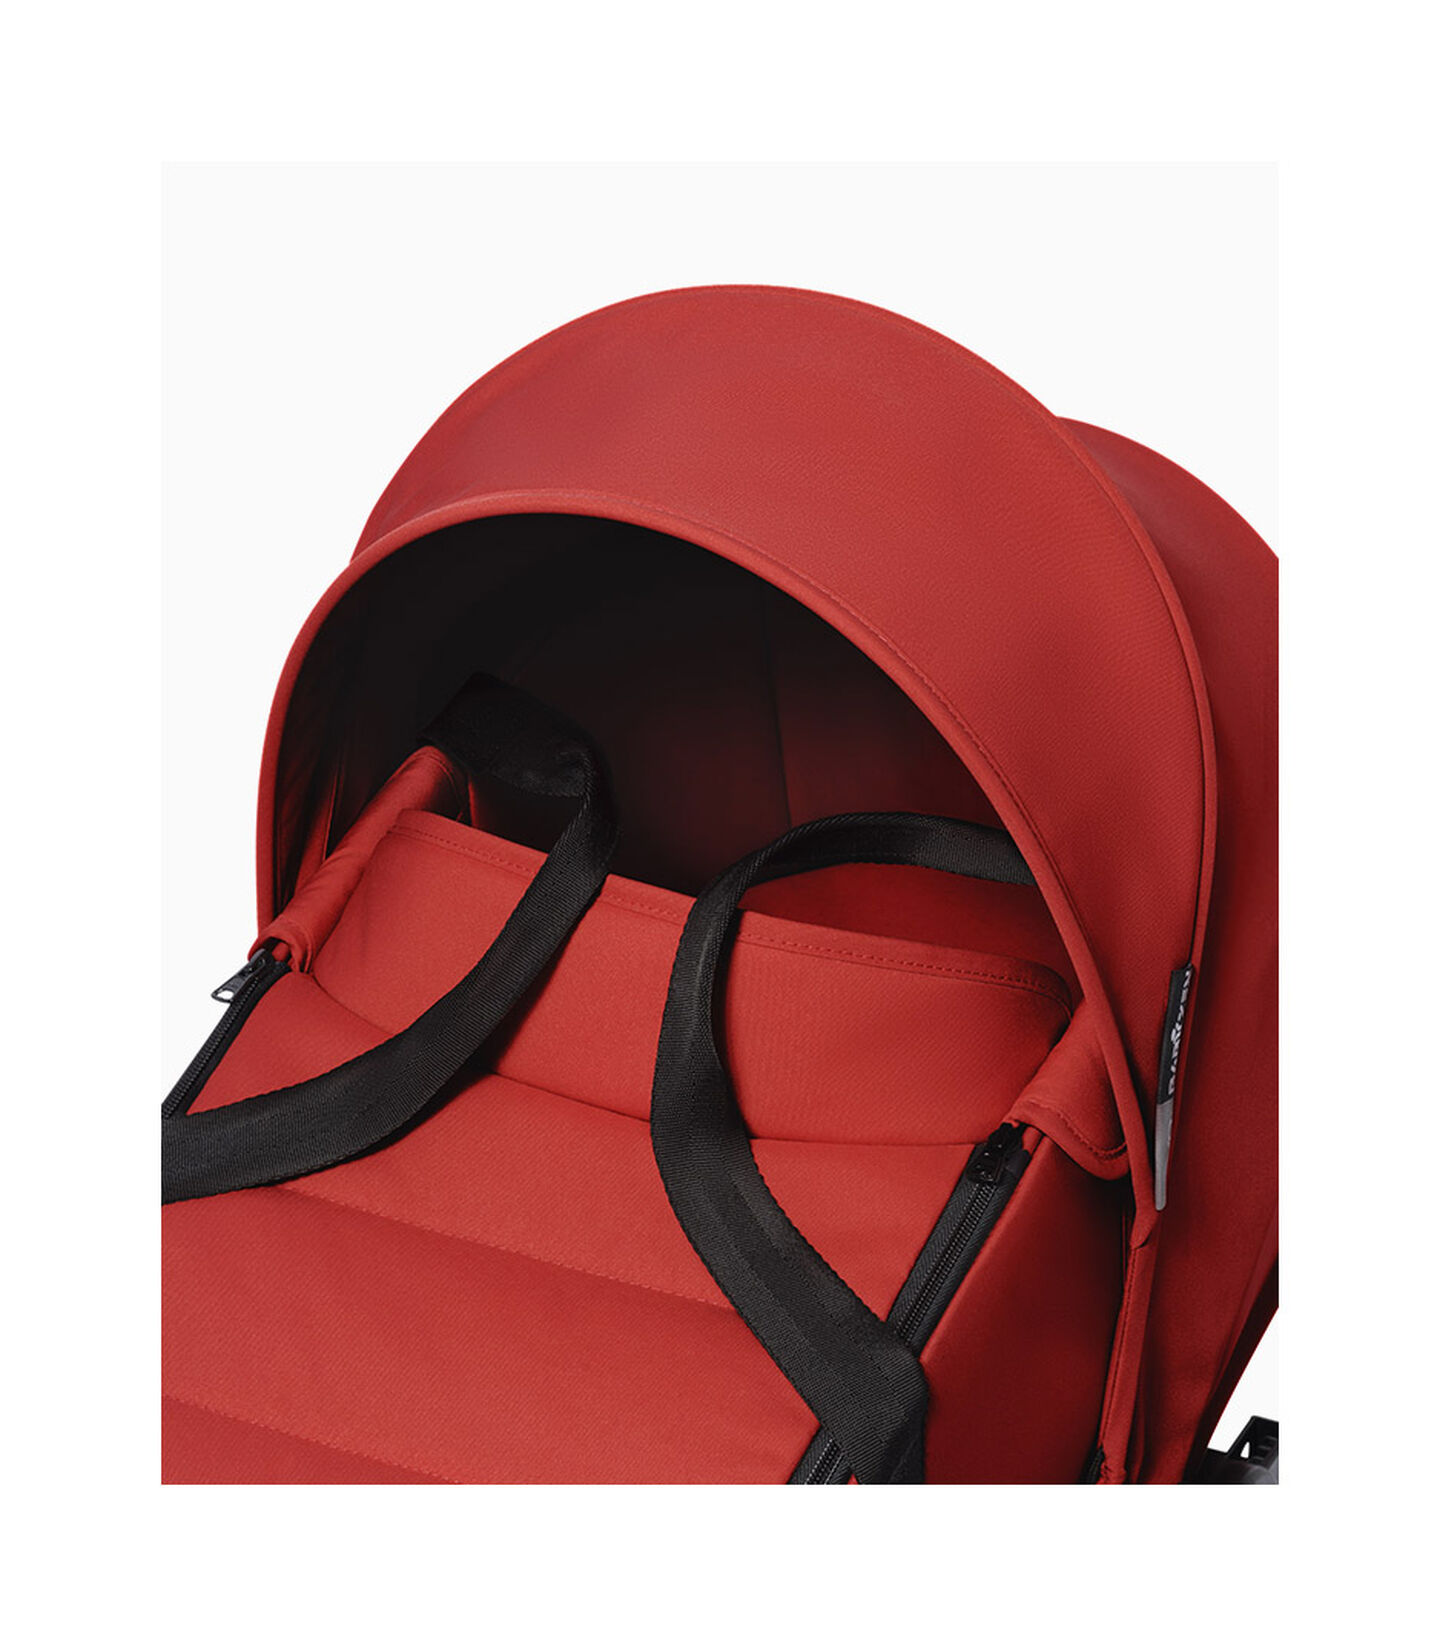 BABYZEN™ YOYO Bassinet - Red, Red, mainview view 5